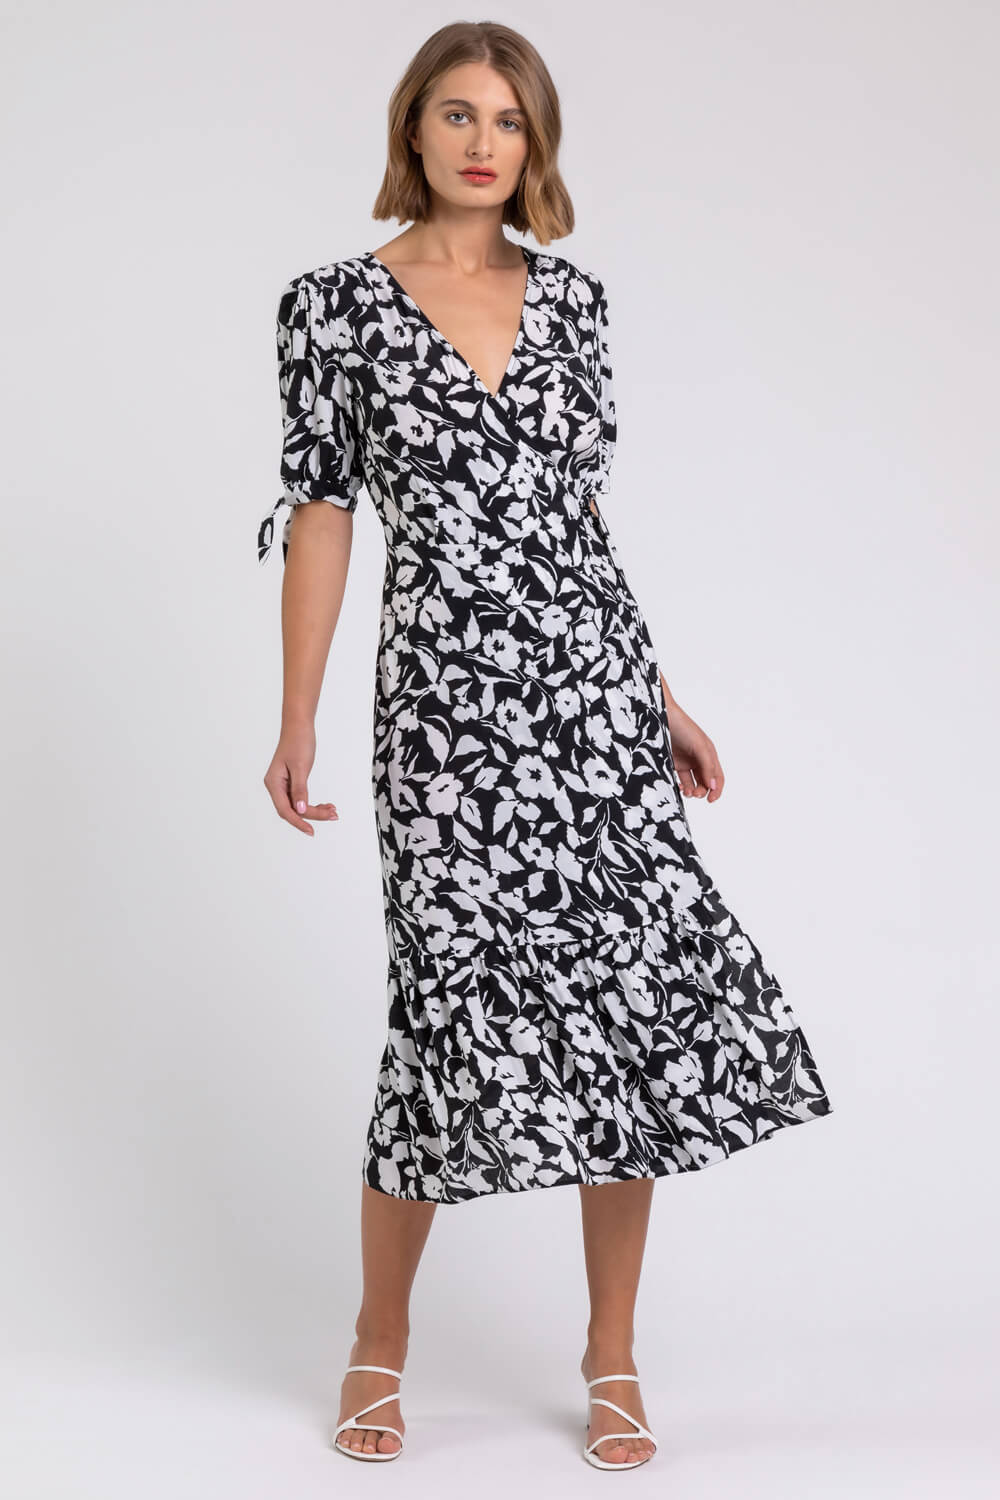 Black Tiered Floral Print Wrap Dress, Image 3 of 4